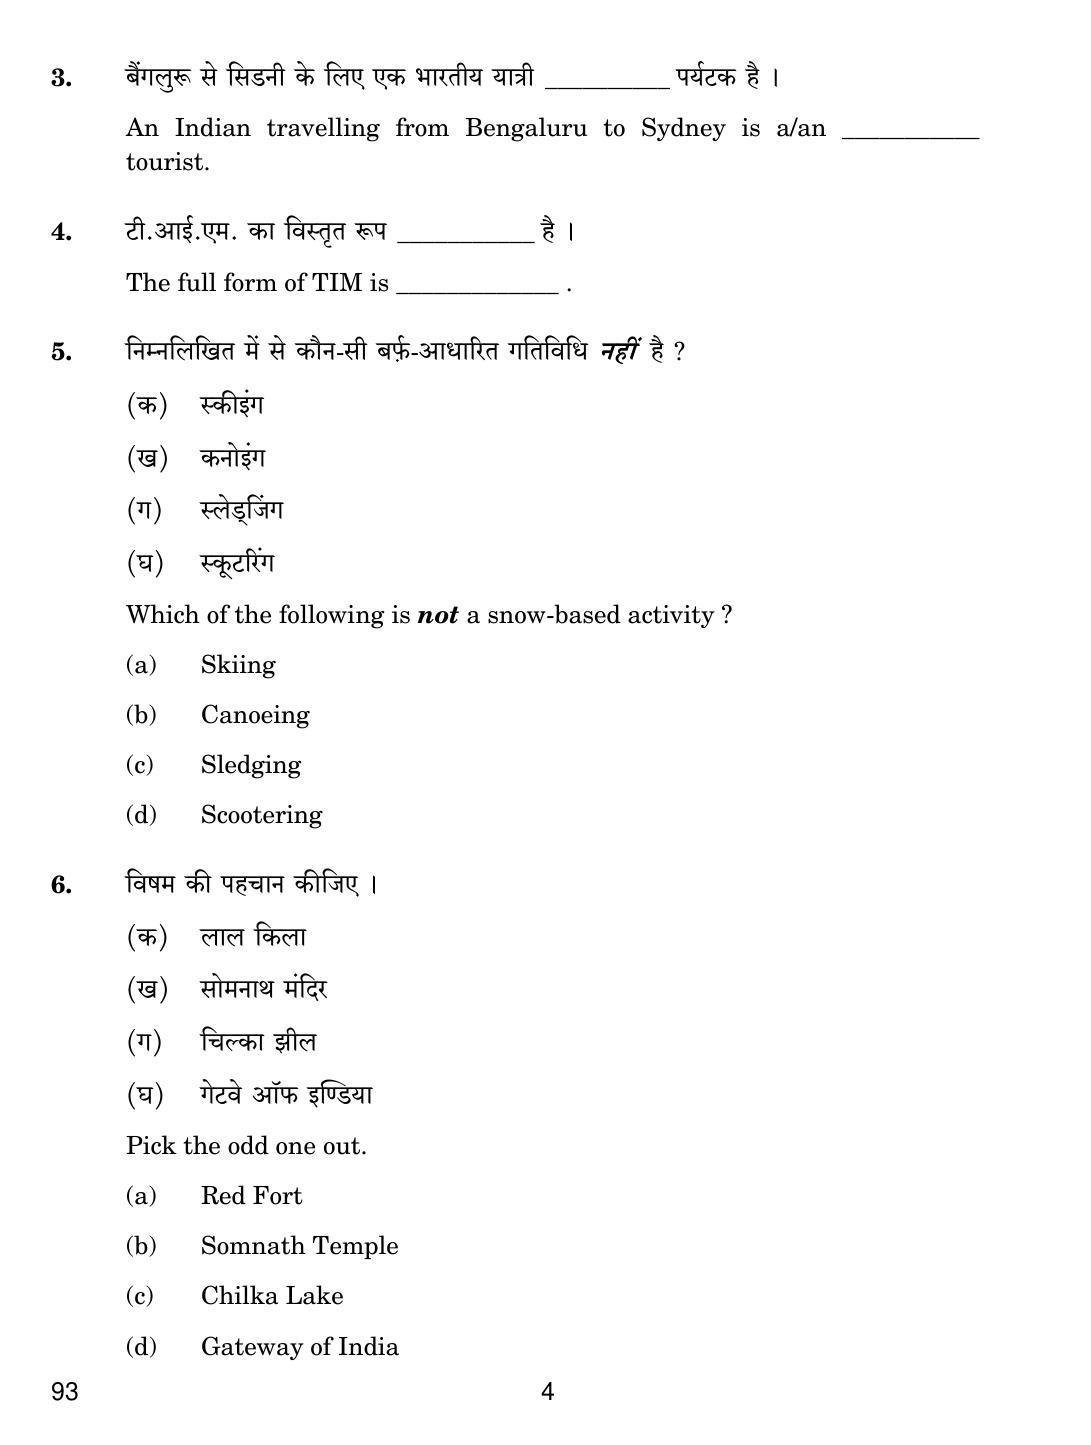 CBSE Class 10 93 INTRODUCTION TO TOURISM 2019 Question Paper - Page 4